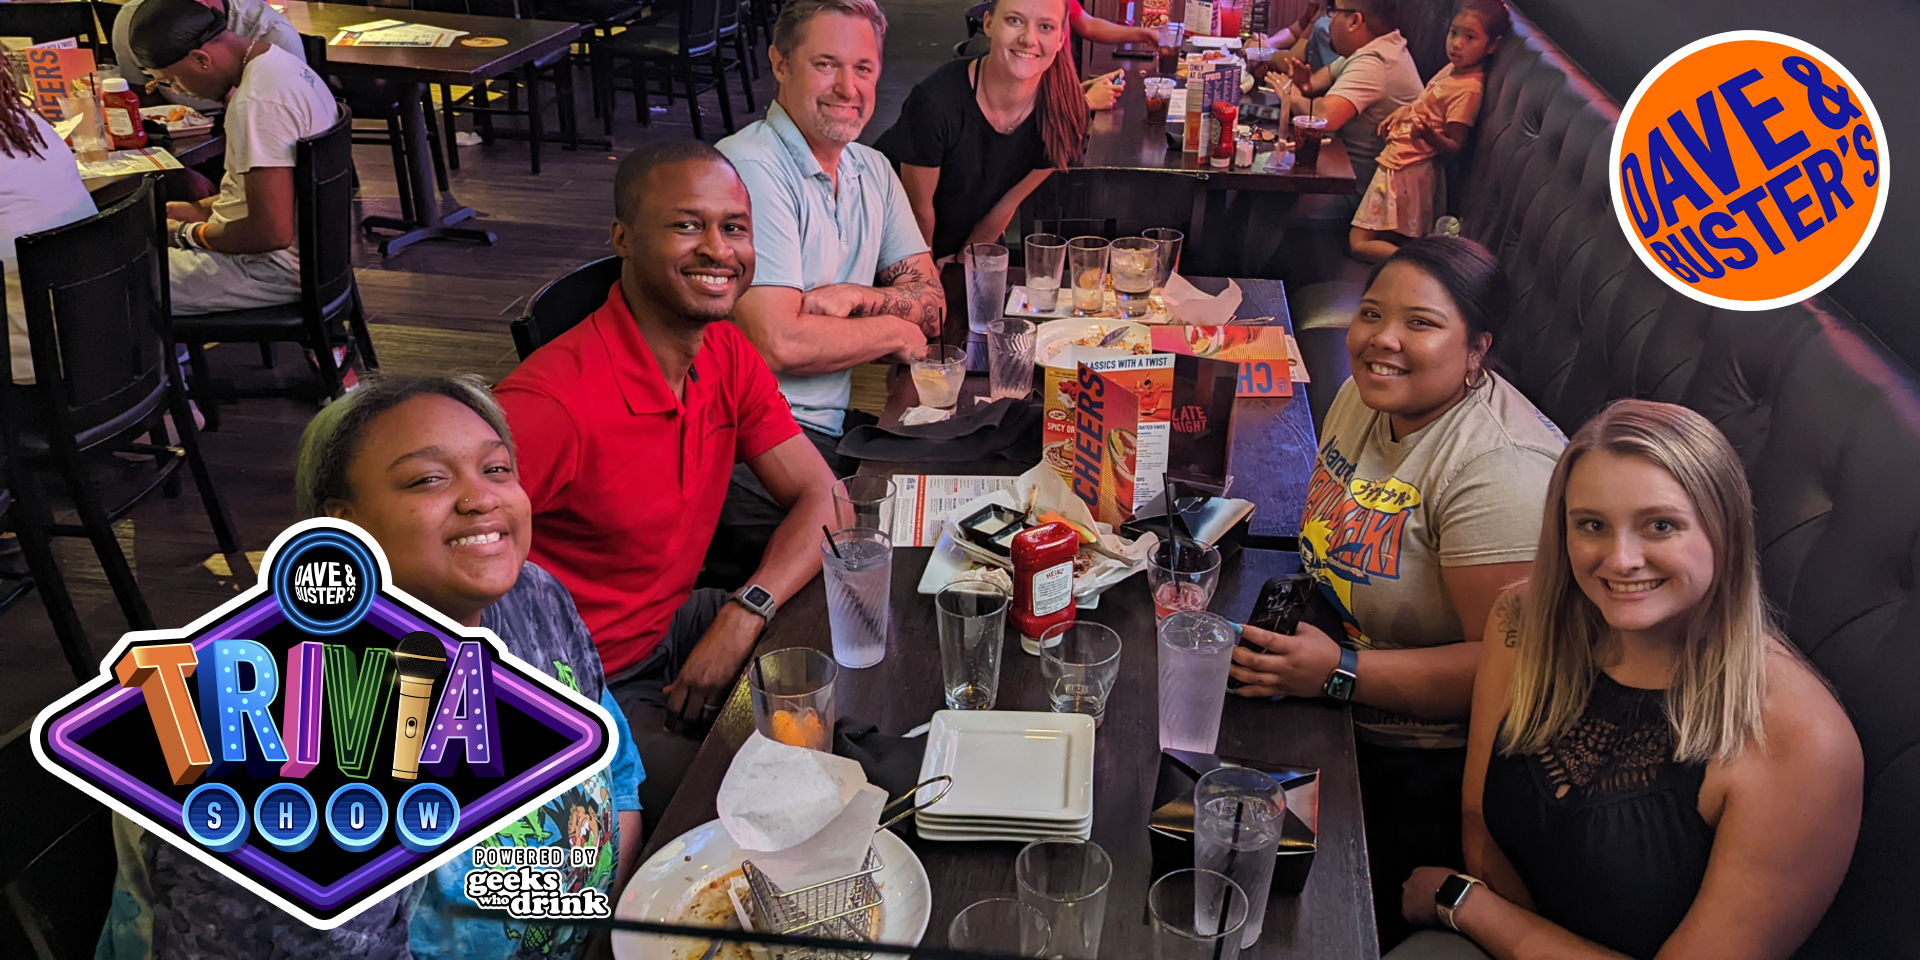 Geeks Who Drink Trivia Night at Dave and Buster's - White Marsh promotional image